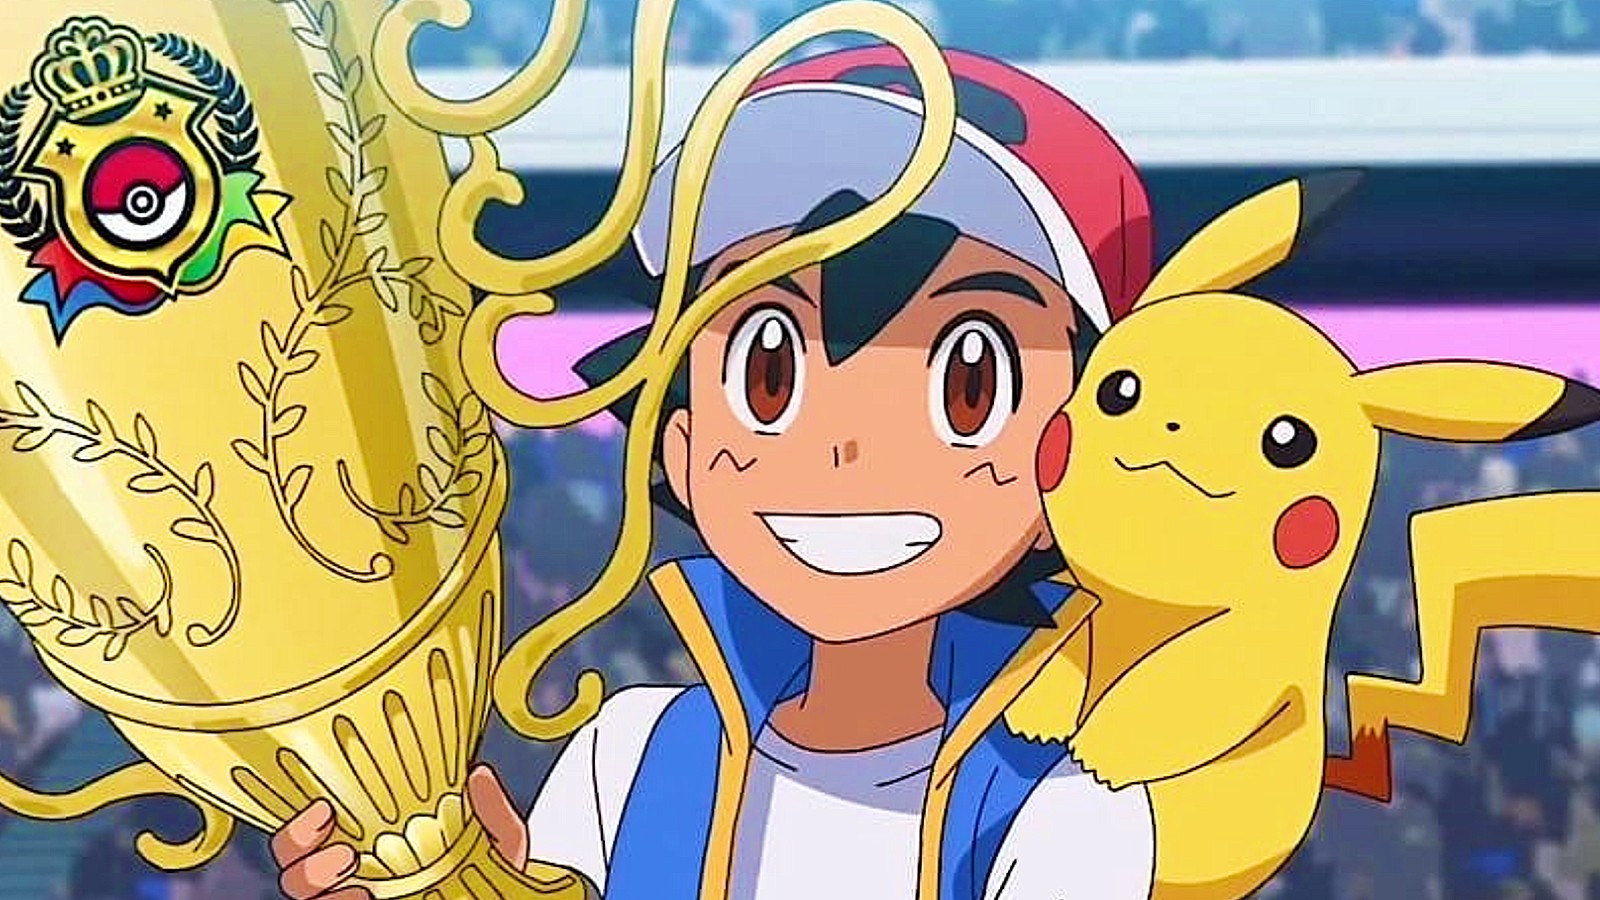 Ash Ketchum Becomes Pokemon Best Trainer in 'Ultimate Journeys